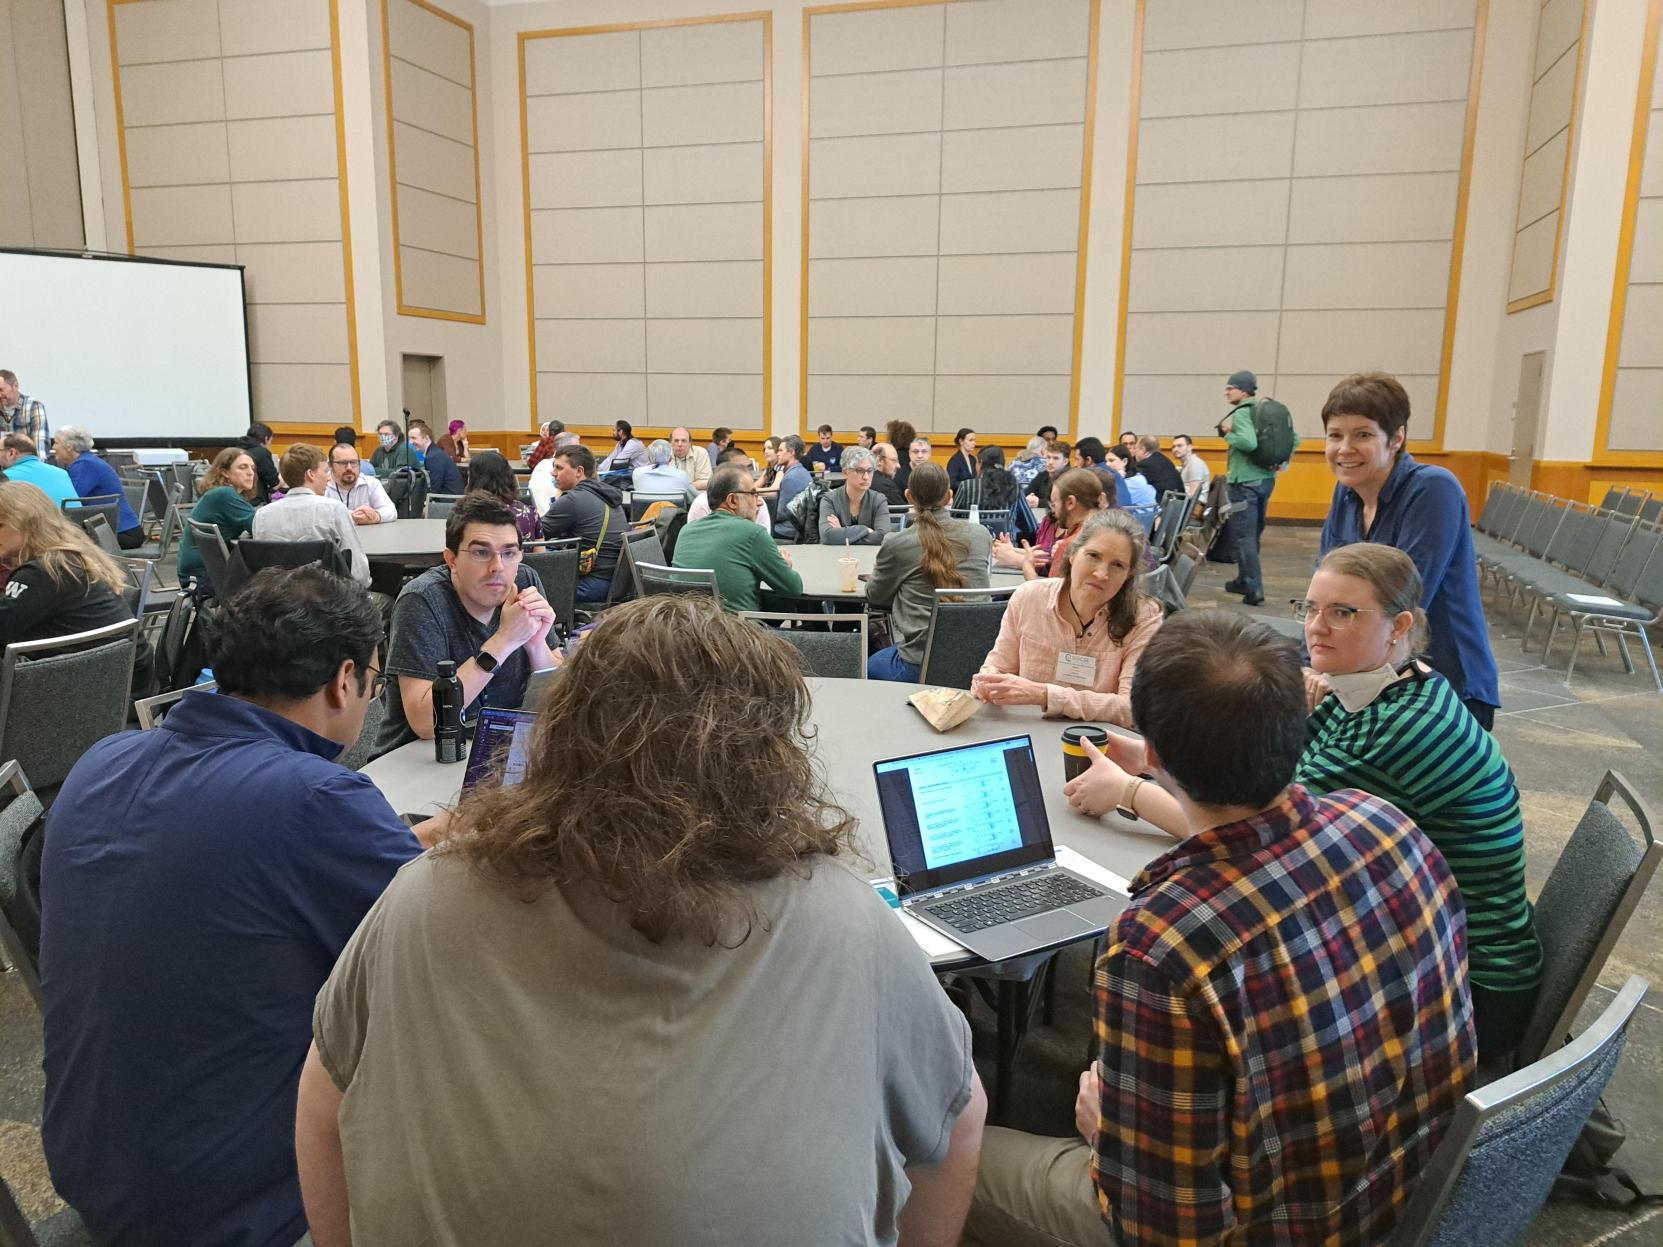 McDaniel leads discussions for teaching track faculty in computer science with collaborators from Northeastern University, University of Connecticut, and Stanford University.